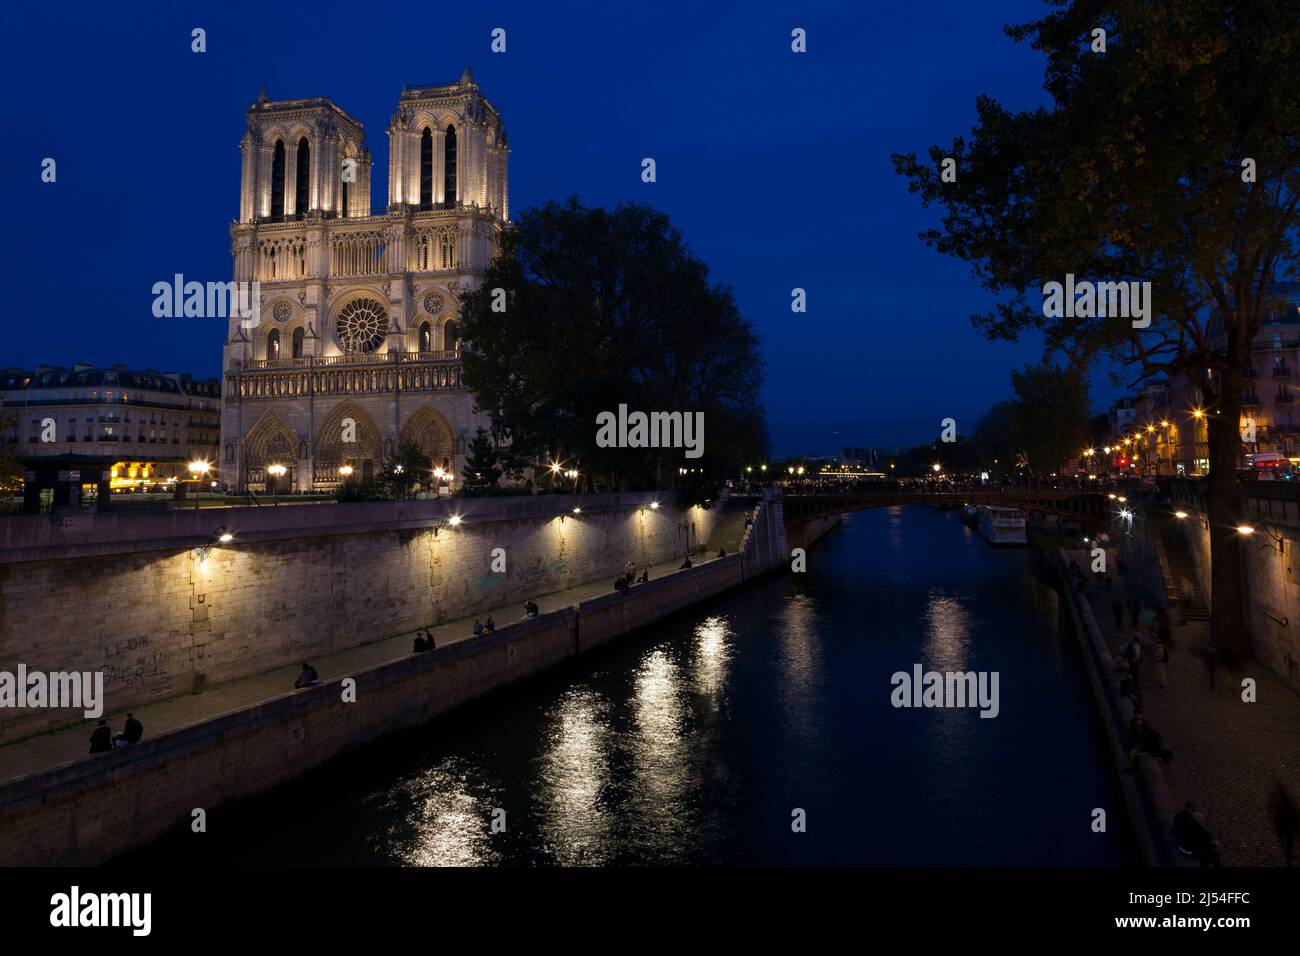 Notre Dame Cathedral and River Seine at night, Paris, France, Europe Stock Photo